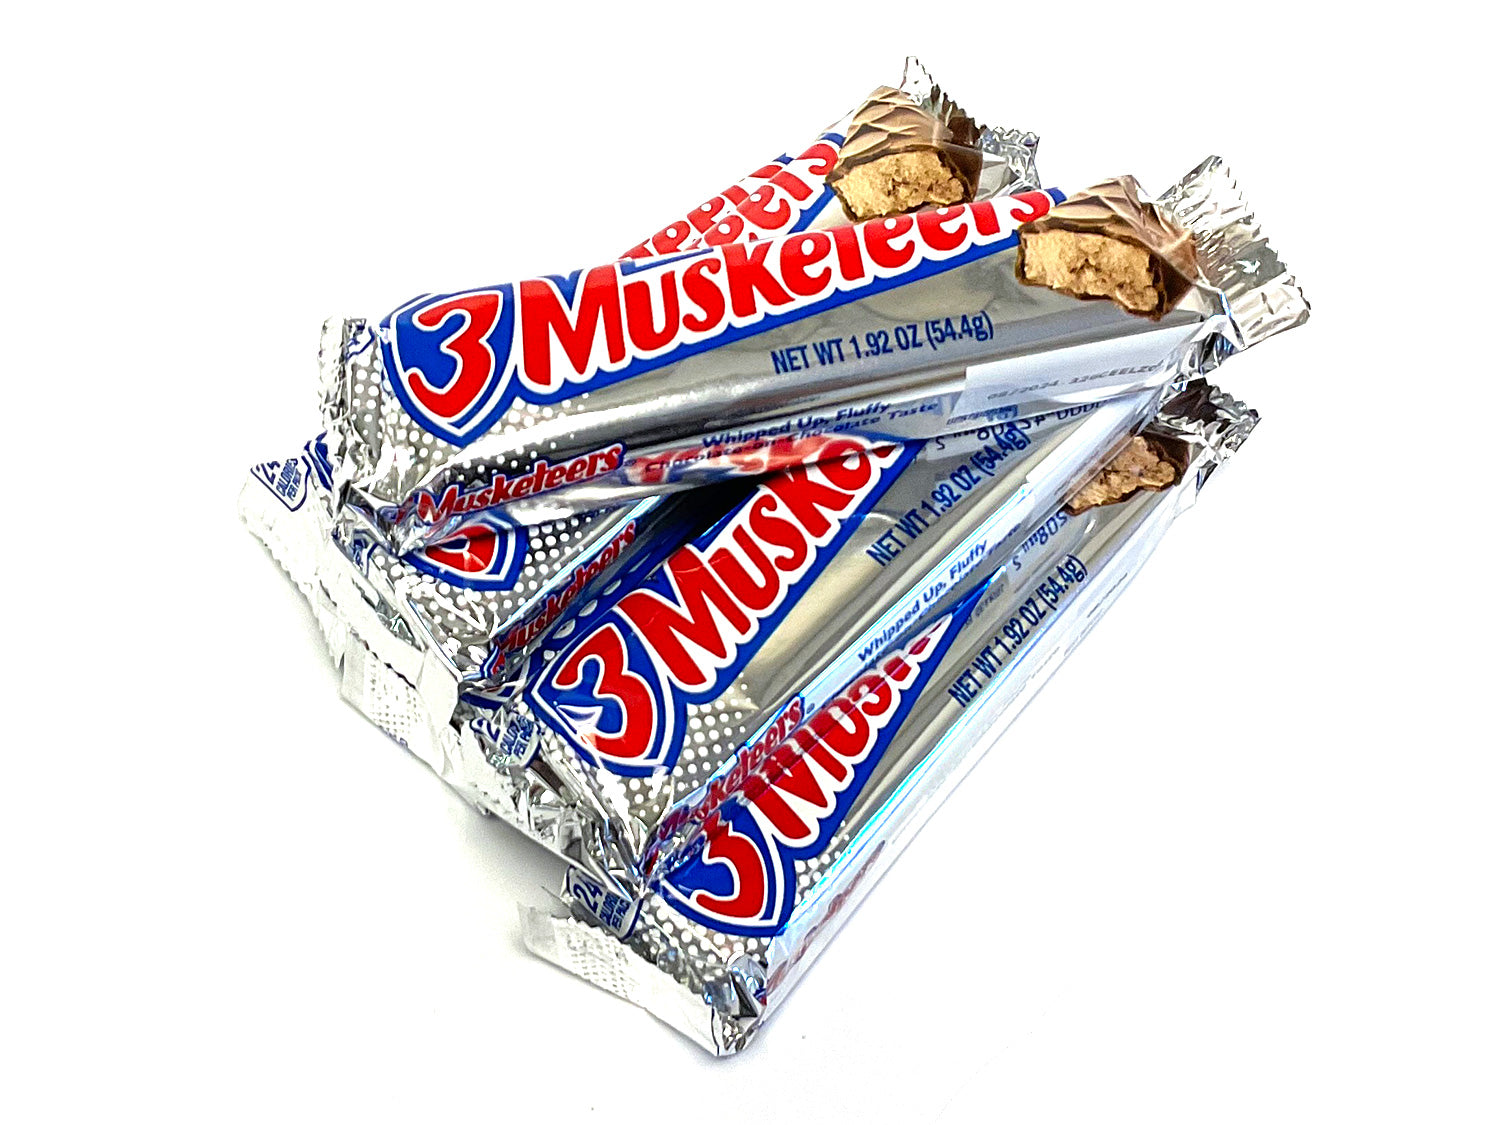 3 Musketeers Chocolate Candy Bar, Full Size, 1.92 oz, 36-count